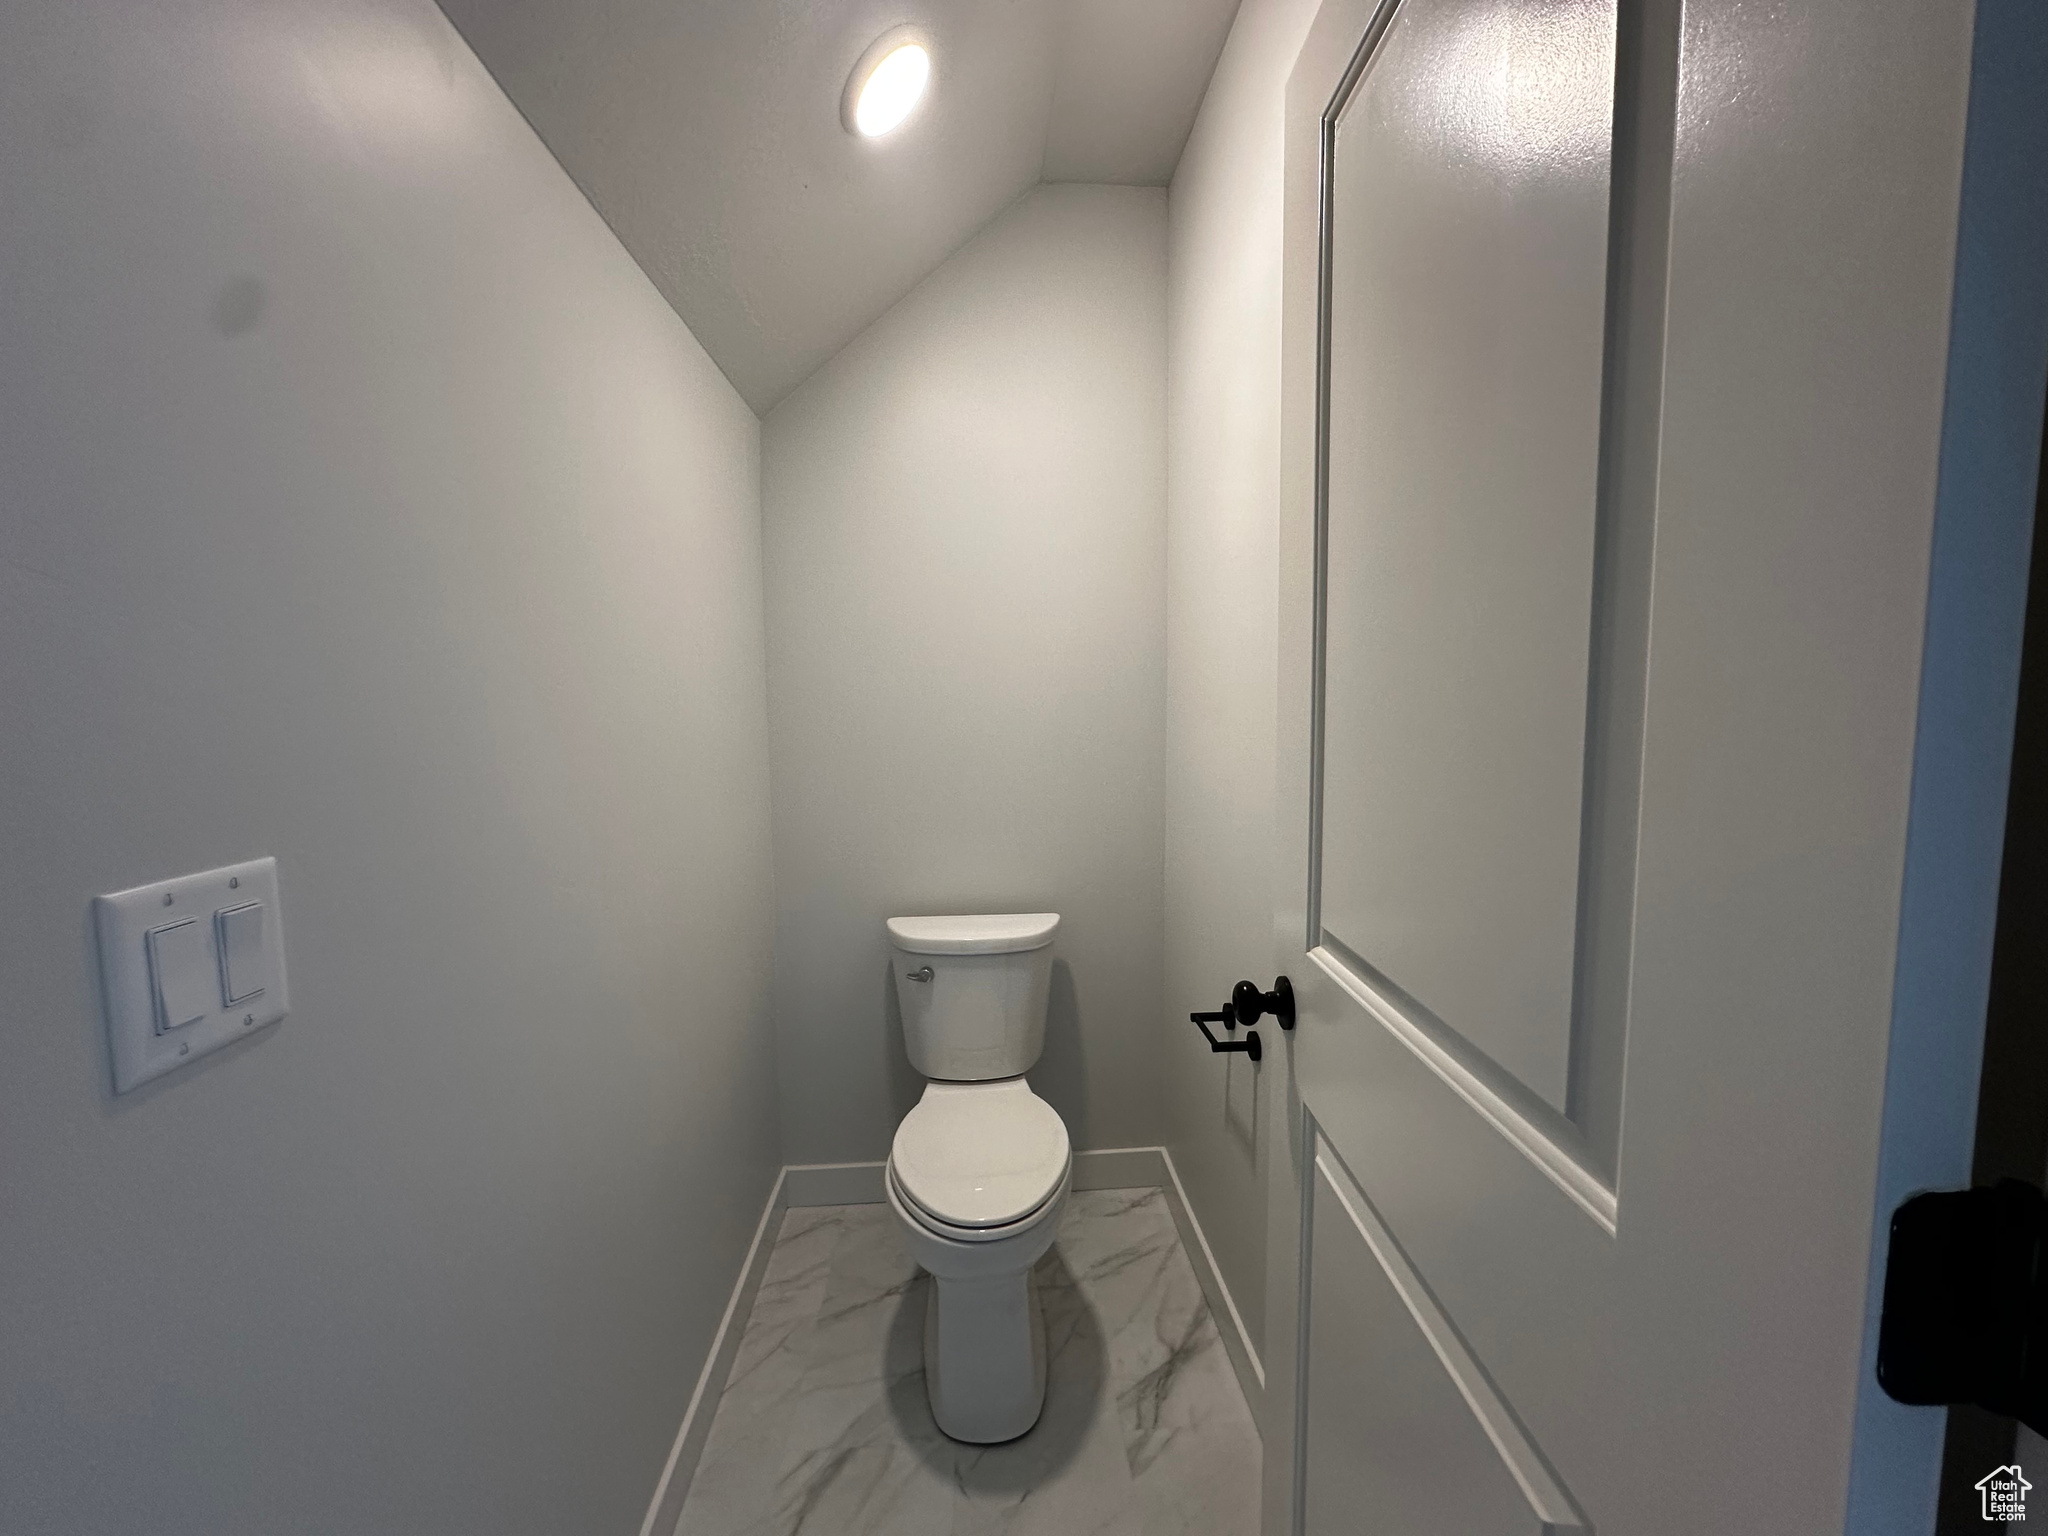 Bathroom with vaulted ceiling, toilet, and tile floors